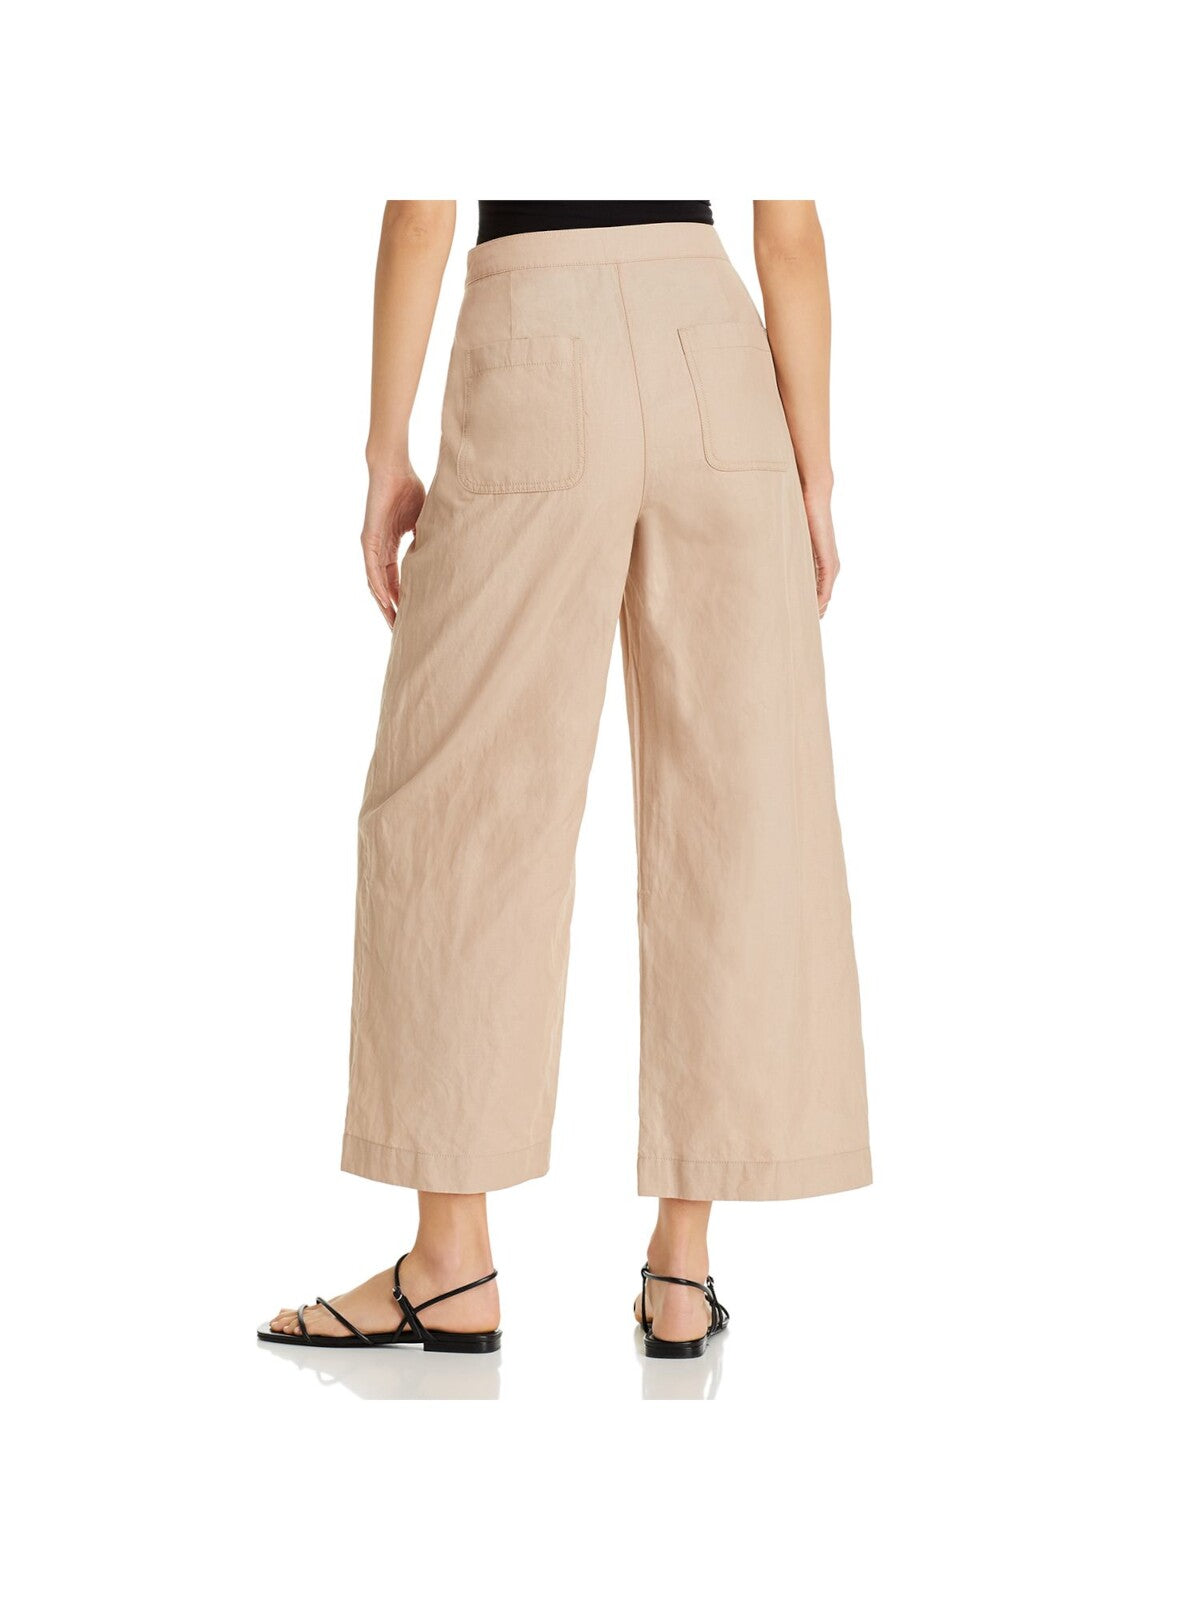 EILEEN FISHER Womens Beige Pocketed Zippered Ankle Wide Leg Pants 4